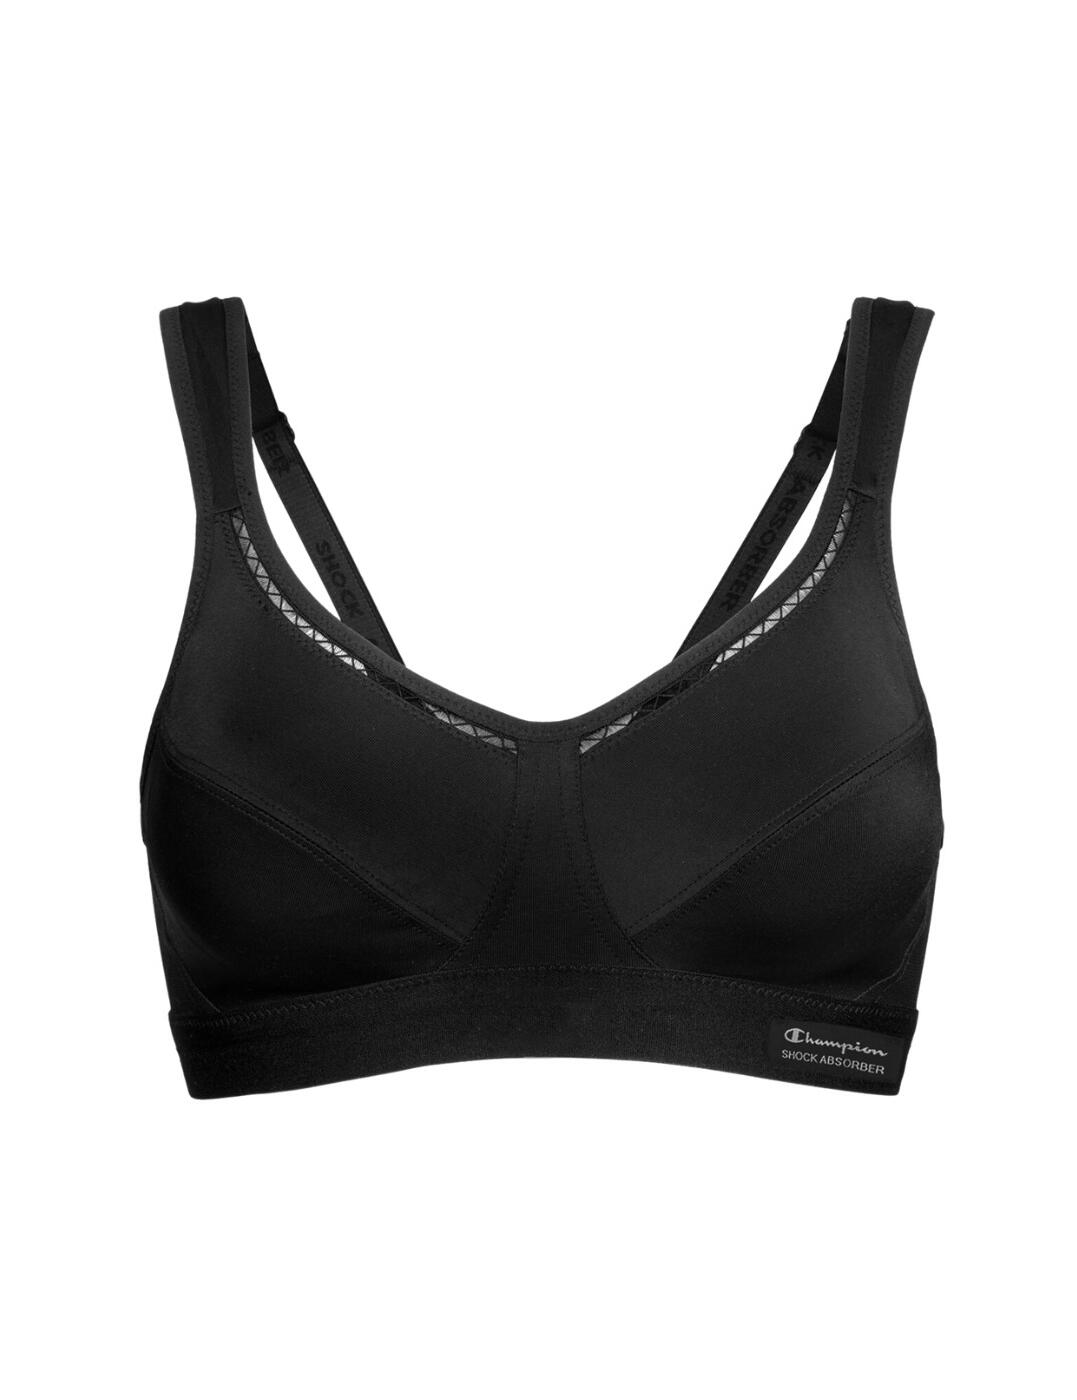 Shock Absorber Classic Non Wired Bra - Belle Lingerie